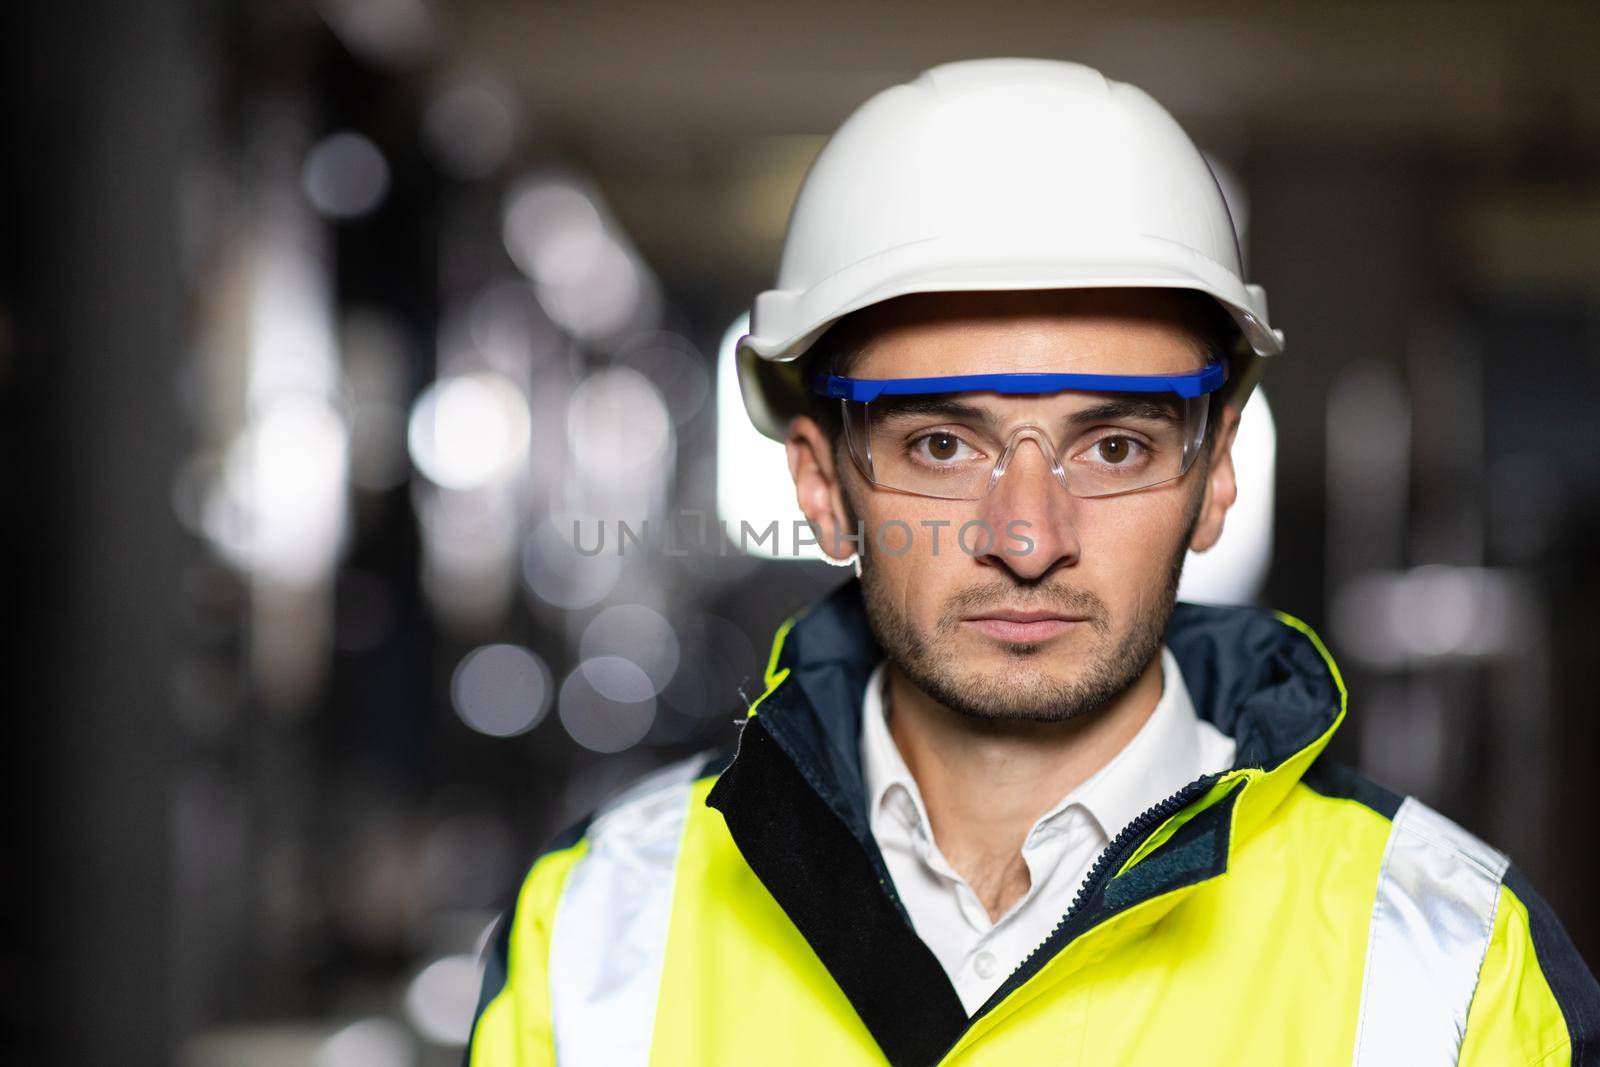 Professional Confident Serious Engineer Looking at Camera, Wearing Safety Uniform and Goggles Standing at Heavy Industry Factory Ready to Manufacturing Works During Metal Welding by Staff.